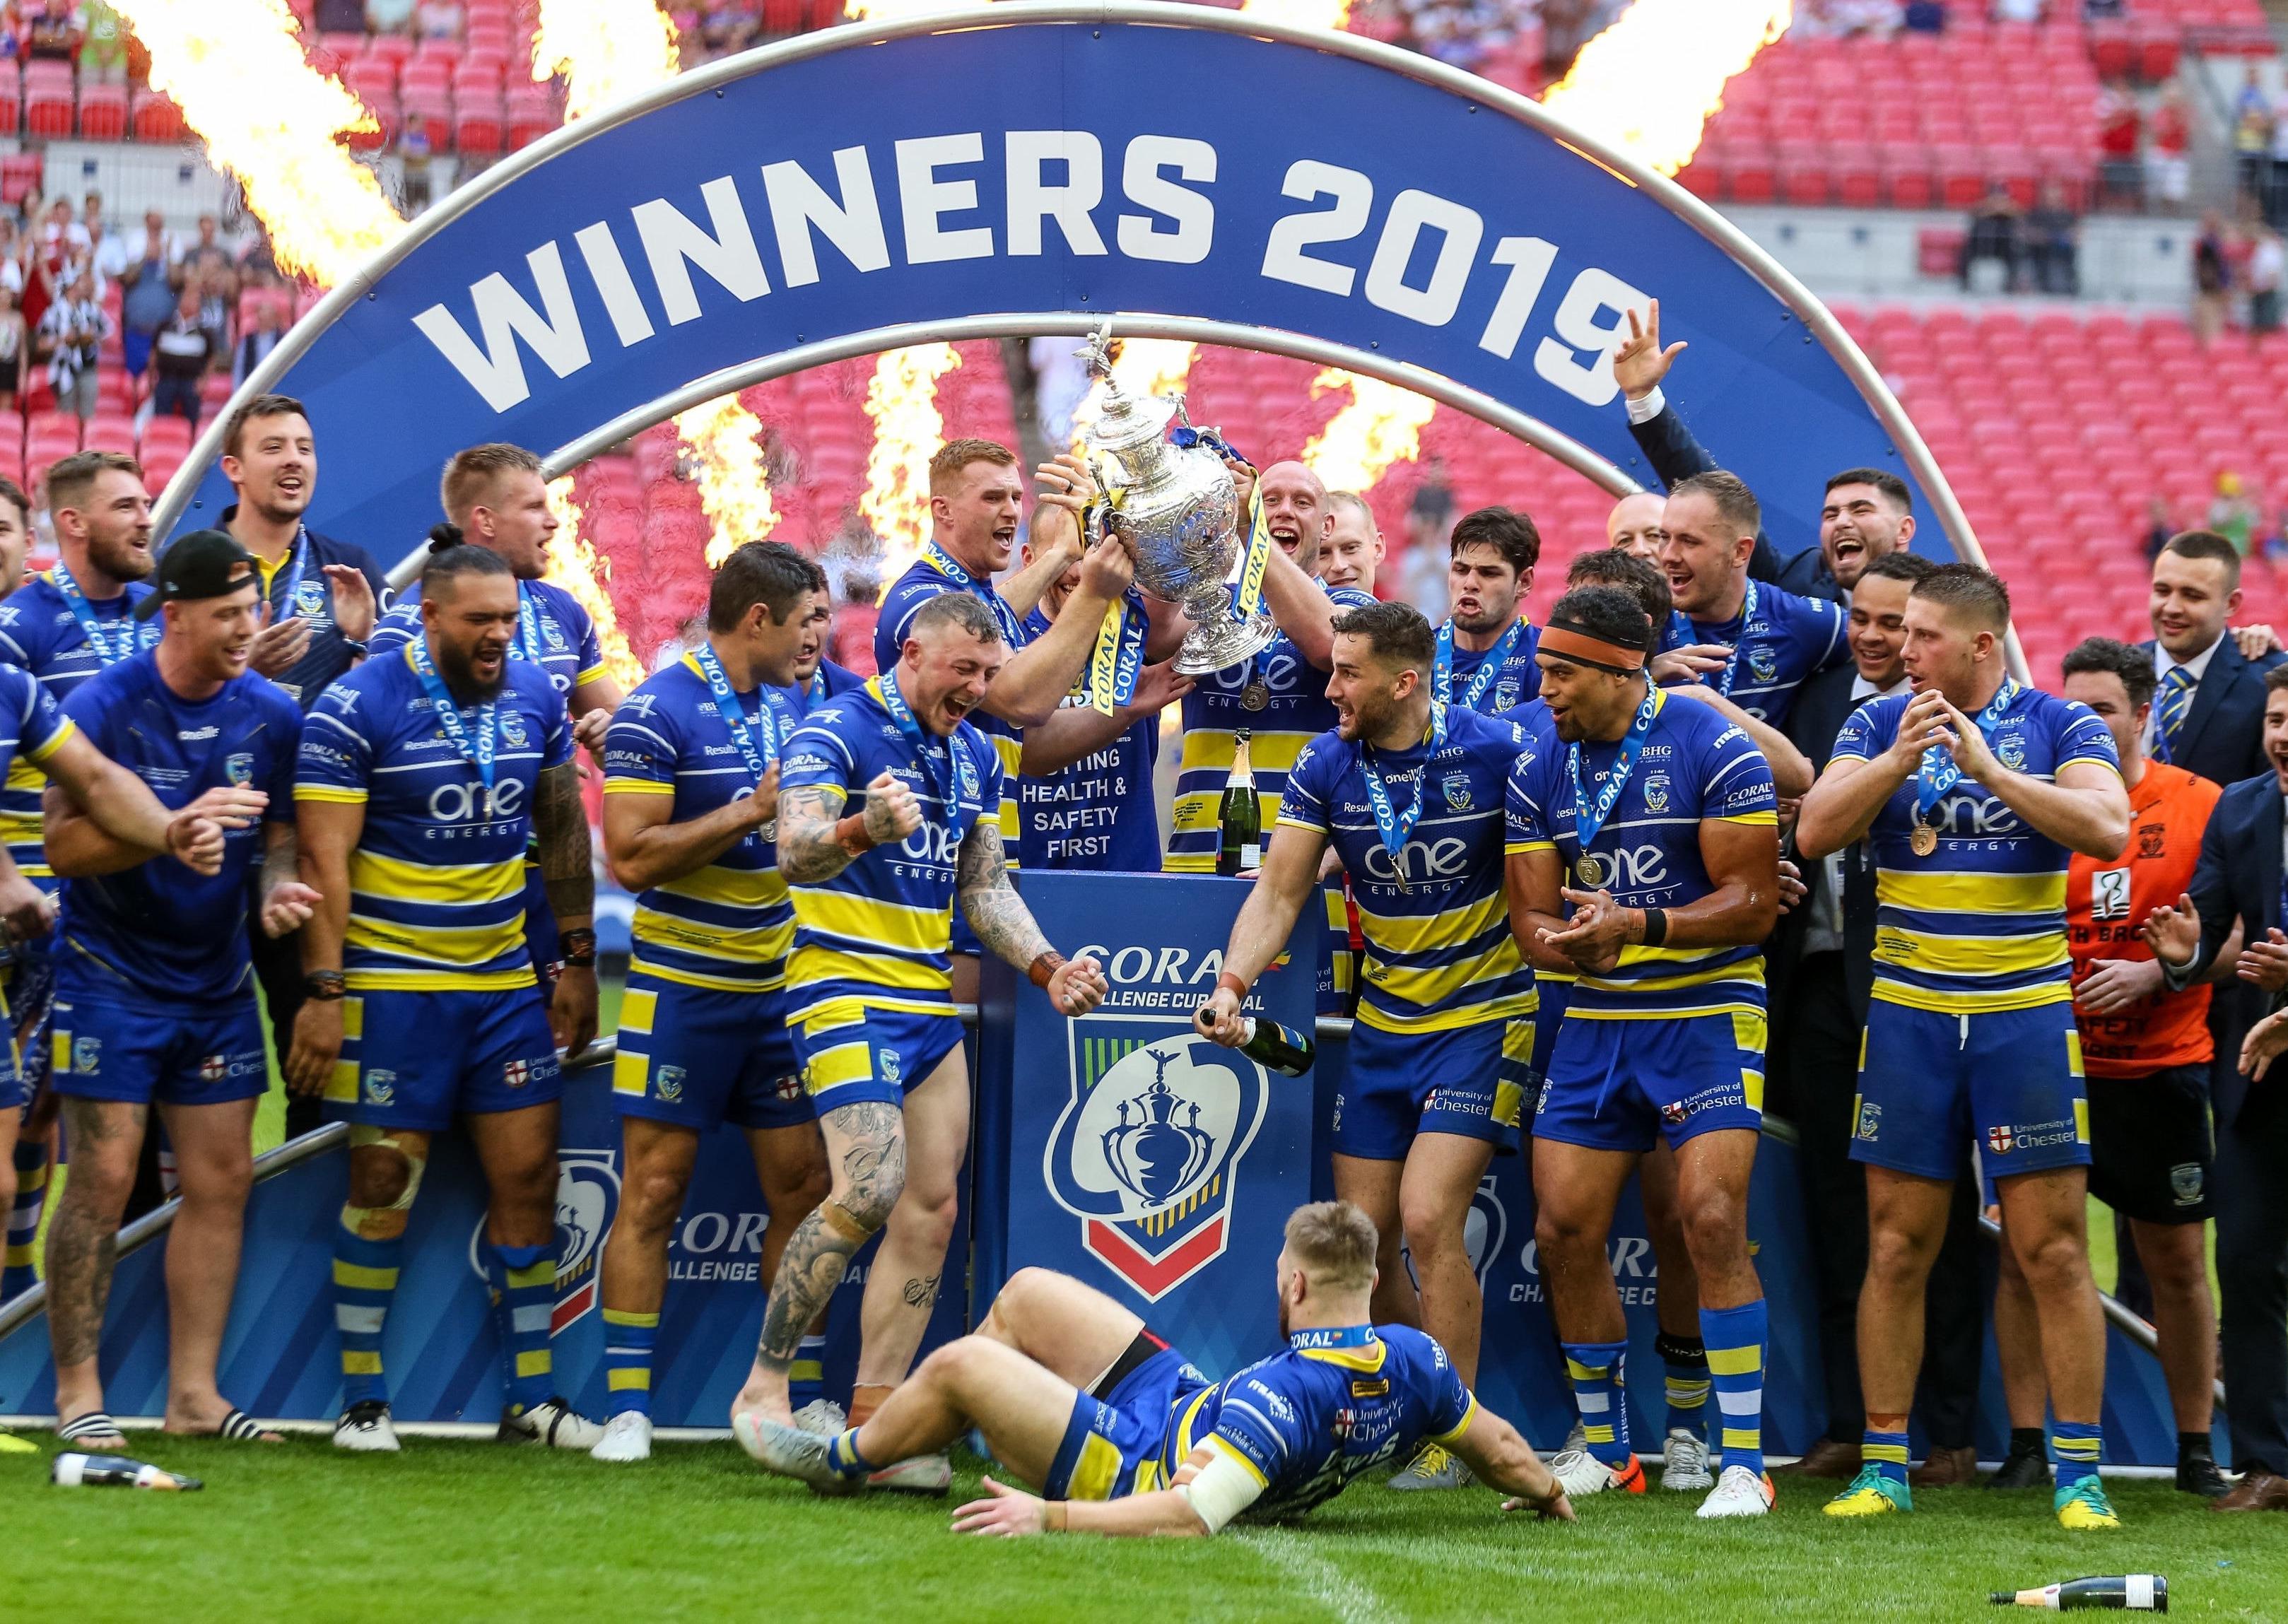 2019 Coral Challenge Cup winners, Warrington Wolves. PIC: Paul Harding/PA Wire